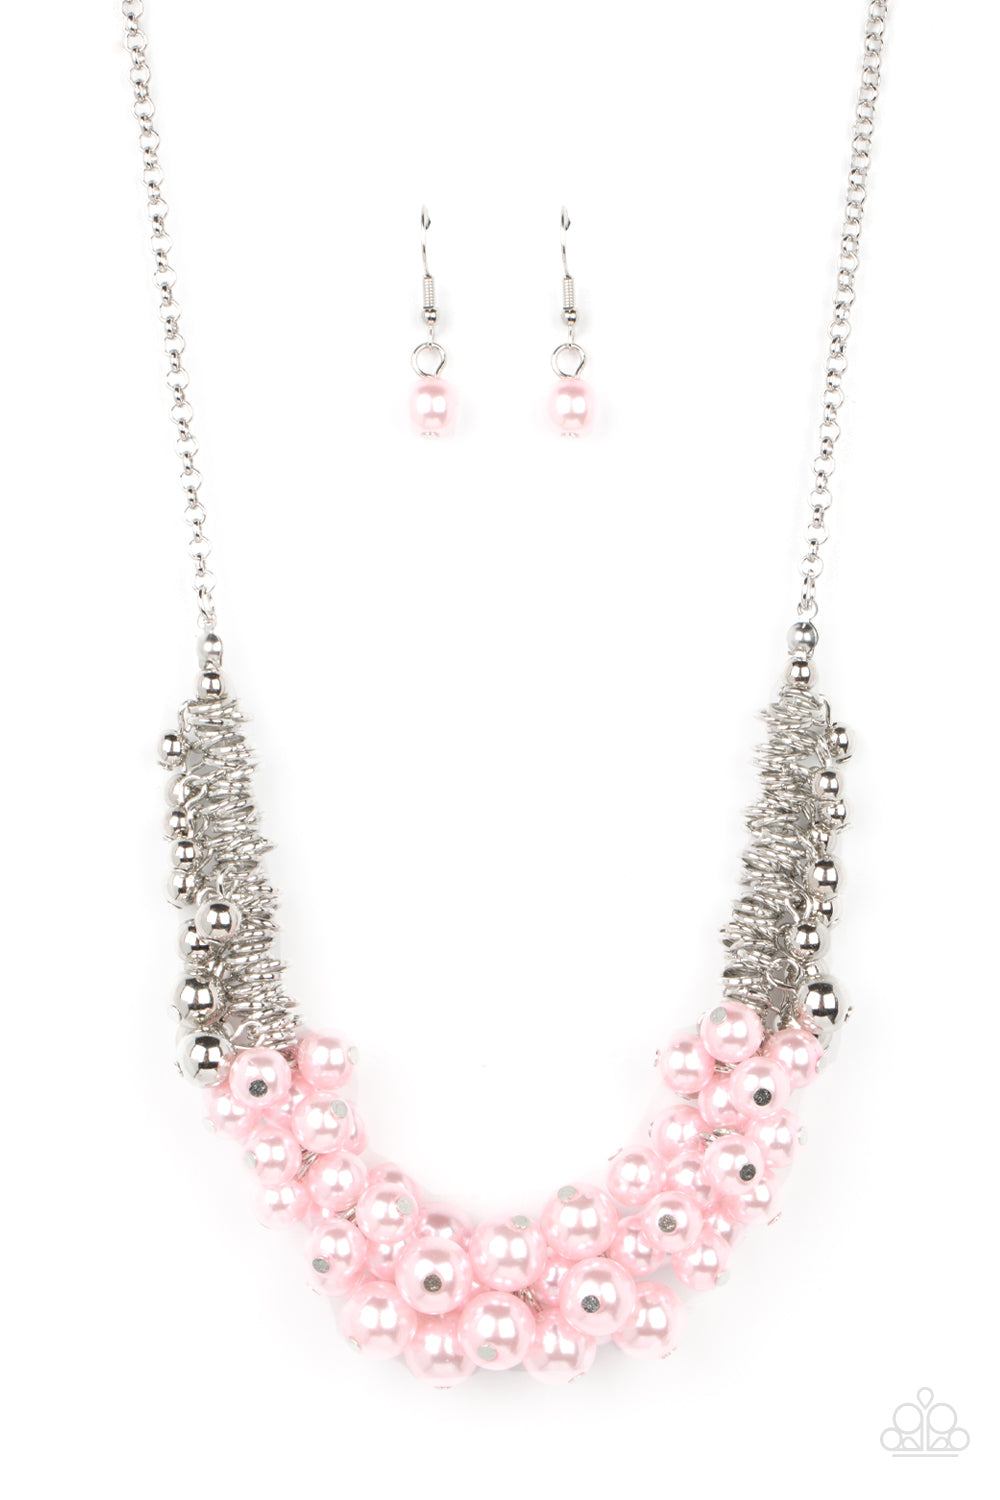 Paparazzi Accessories - Bonus Points - Pink Pearl Necklace a bubbly cluster of Gossamer Pink pearls are bunched together between hanging silver beads that dangle between jampacked rows of silver rings, resulting in exaggerated effervescence below the collar. Features an adjustable clasp closure.  Sold as one individual necklace. Includes one pair of matching earrings.